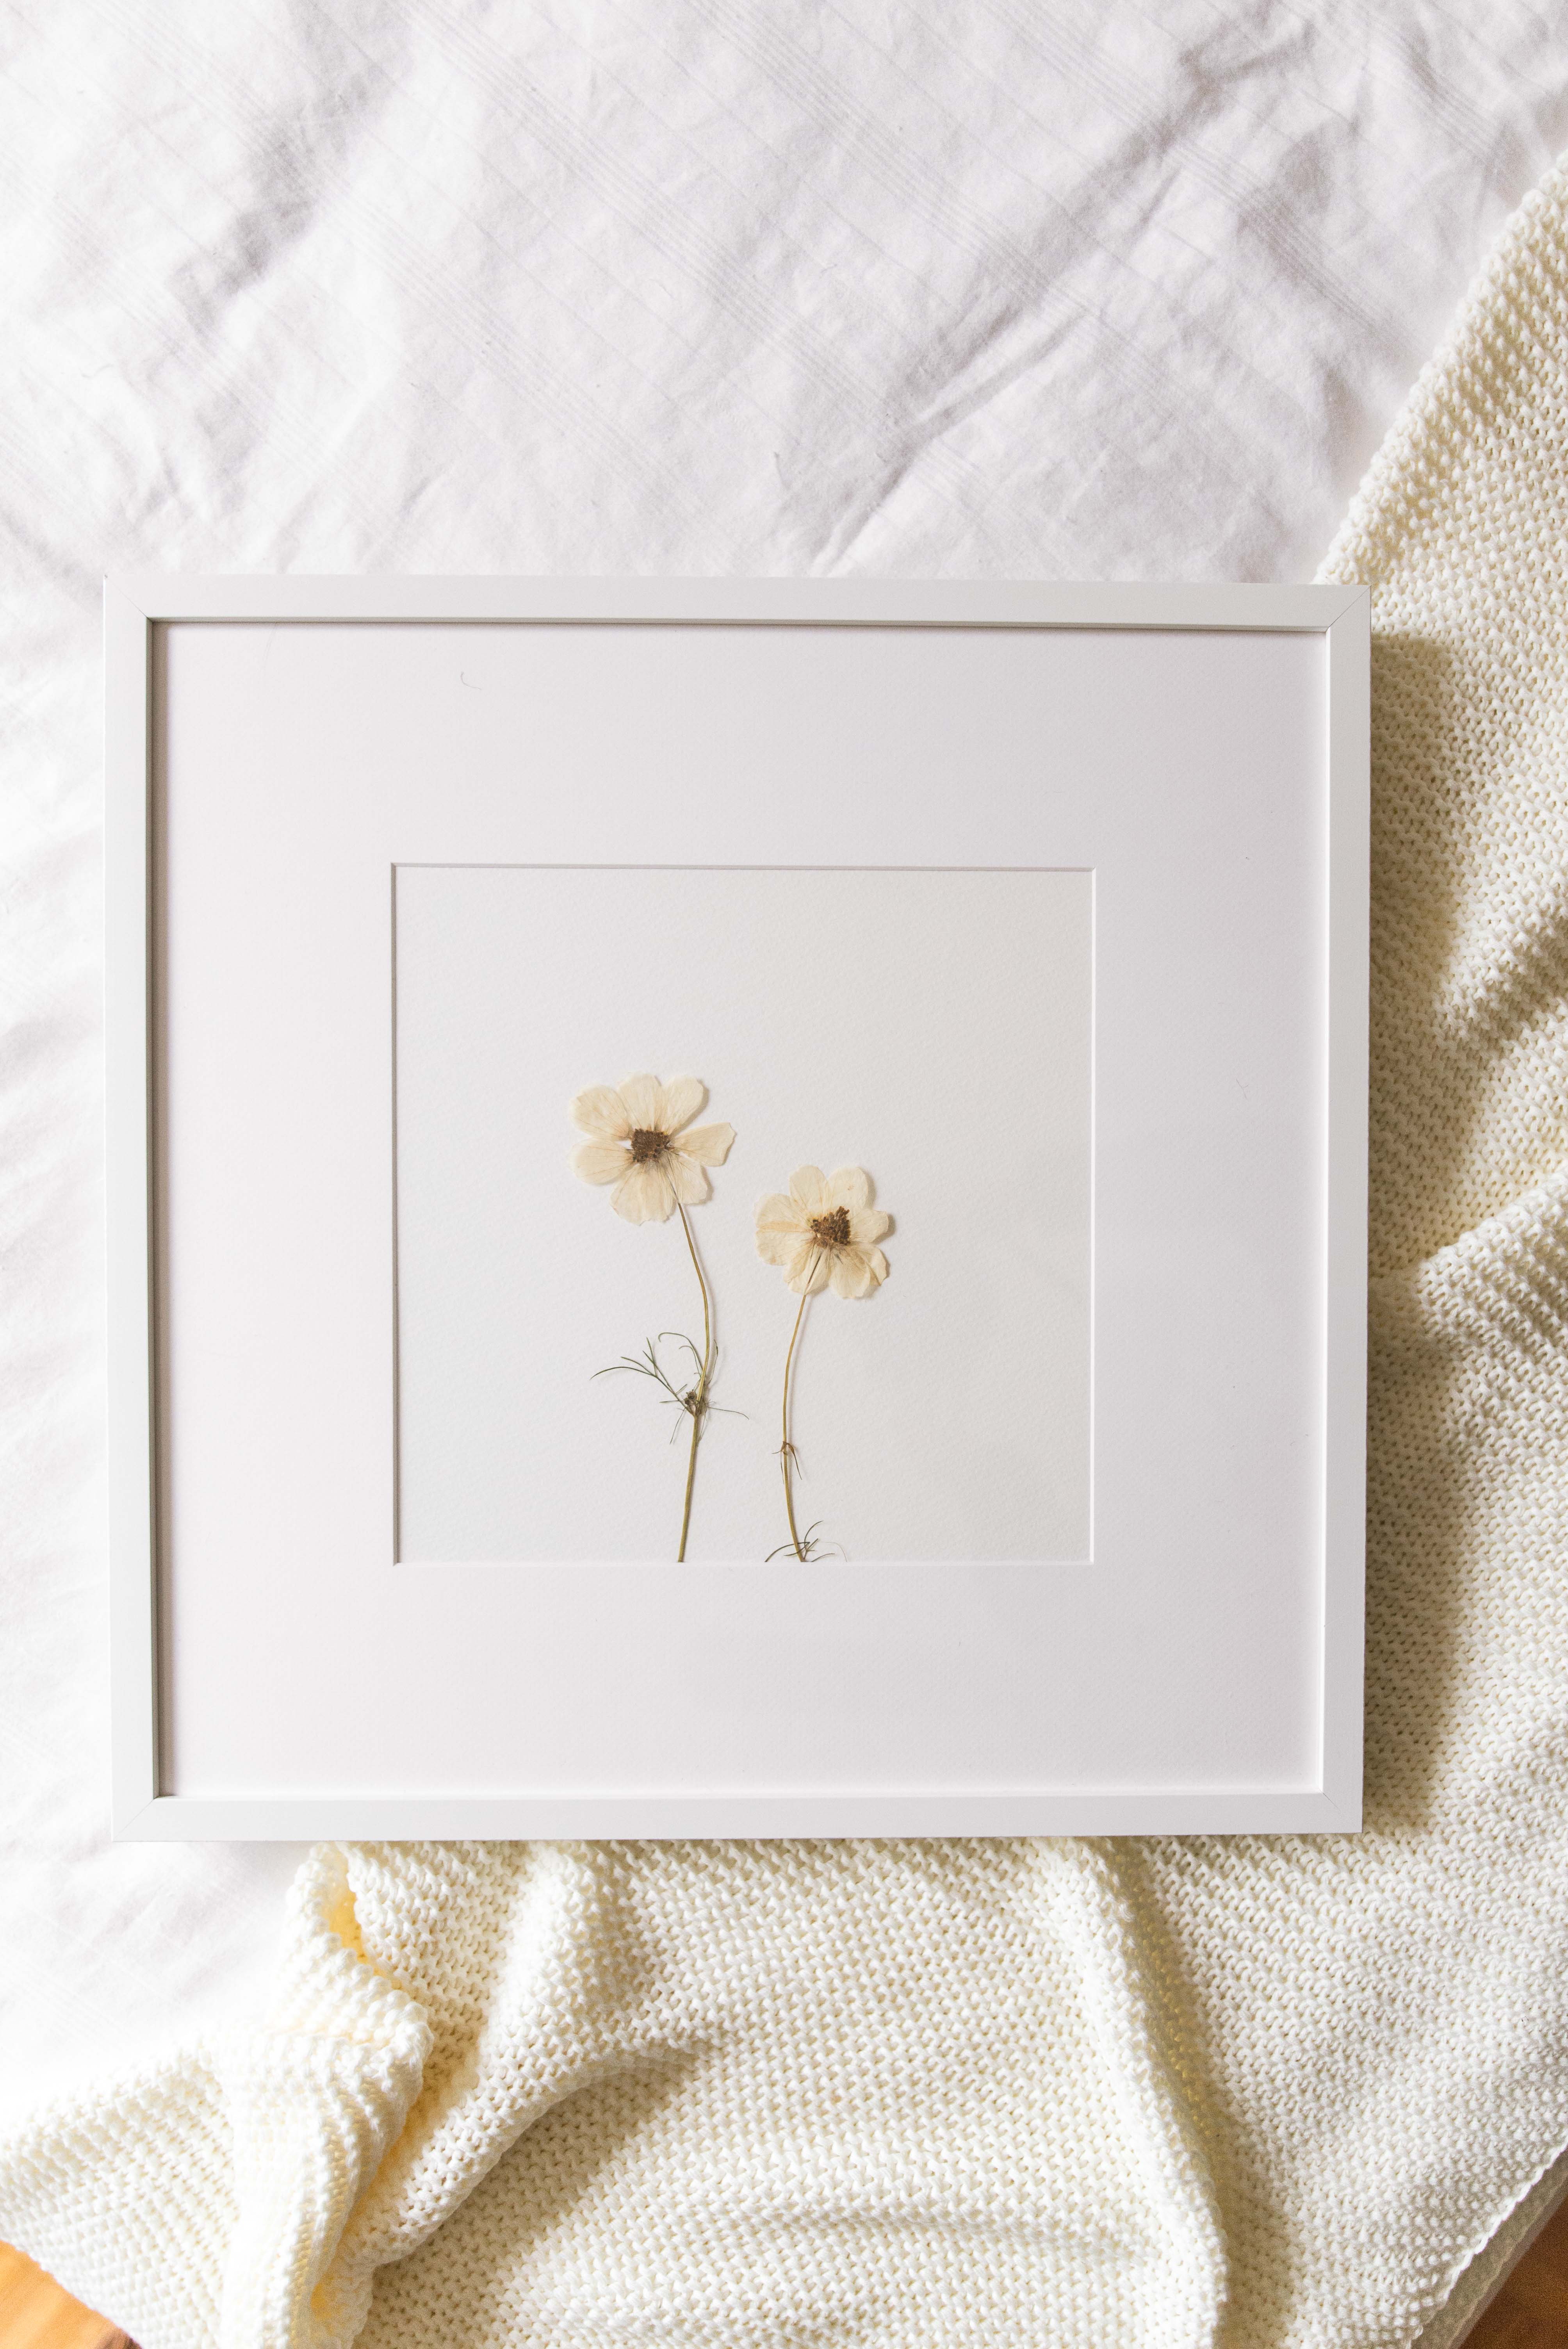 Pressed Flowers - How to Make a Flower Press and Display Pressed